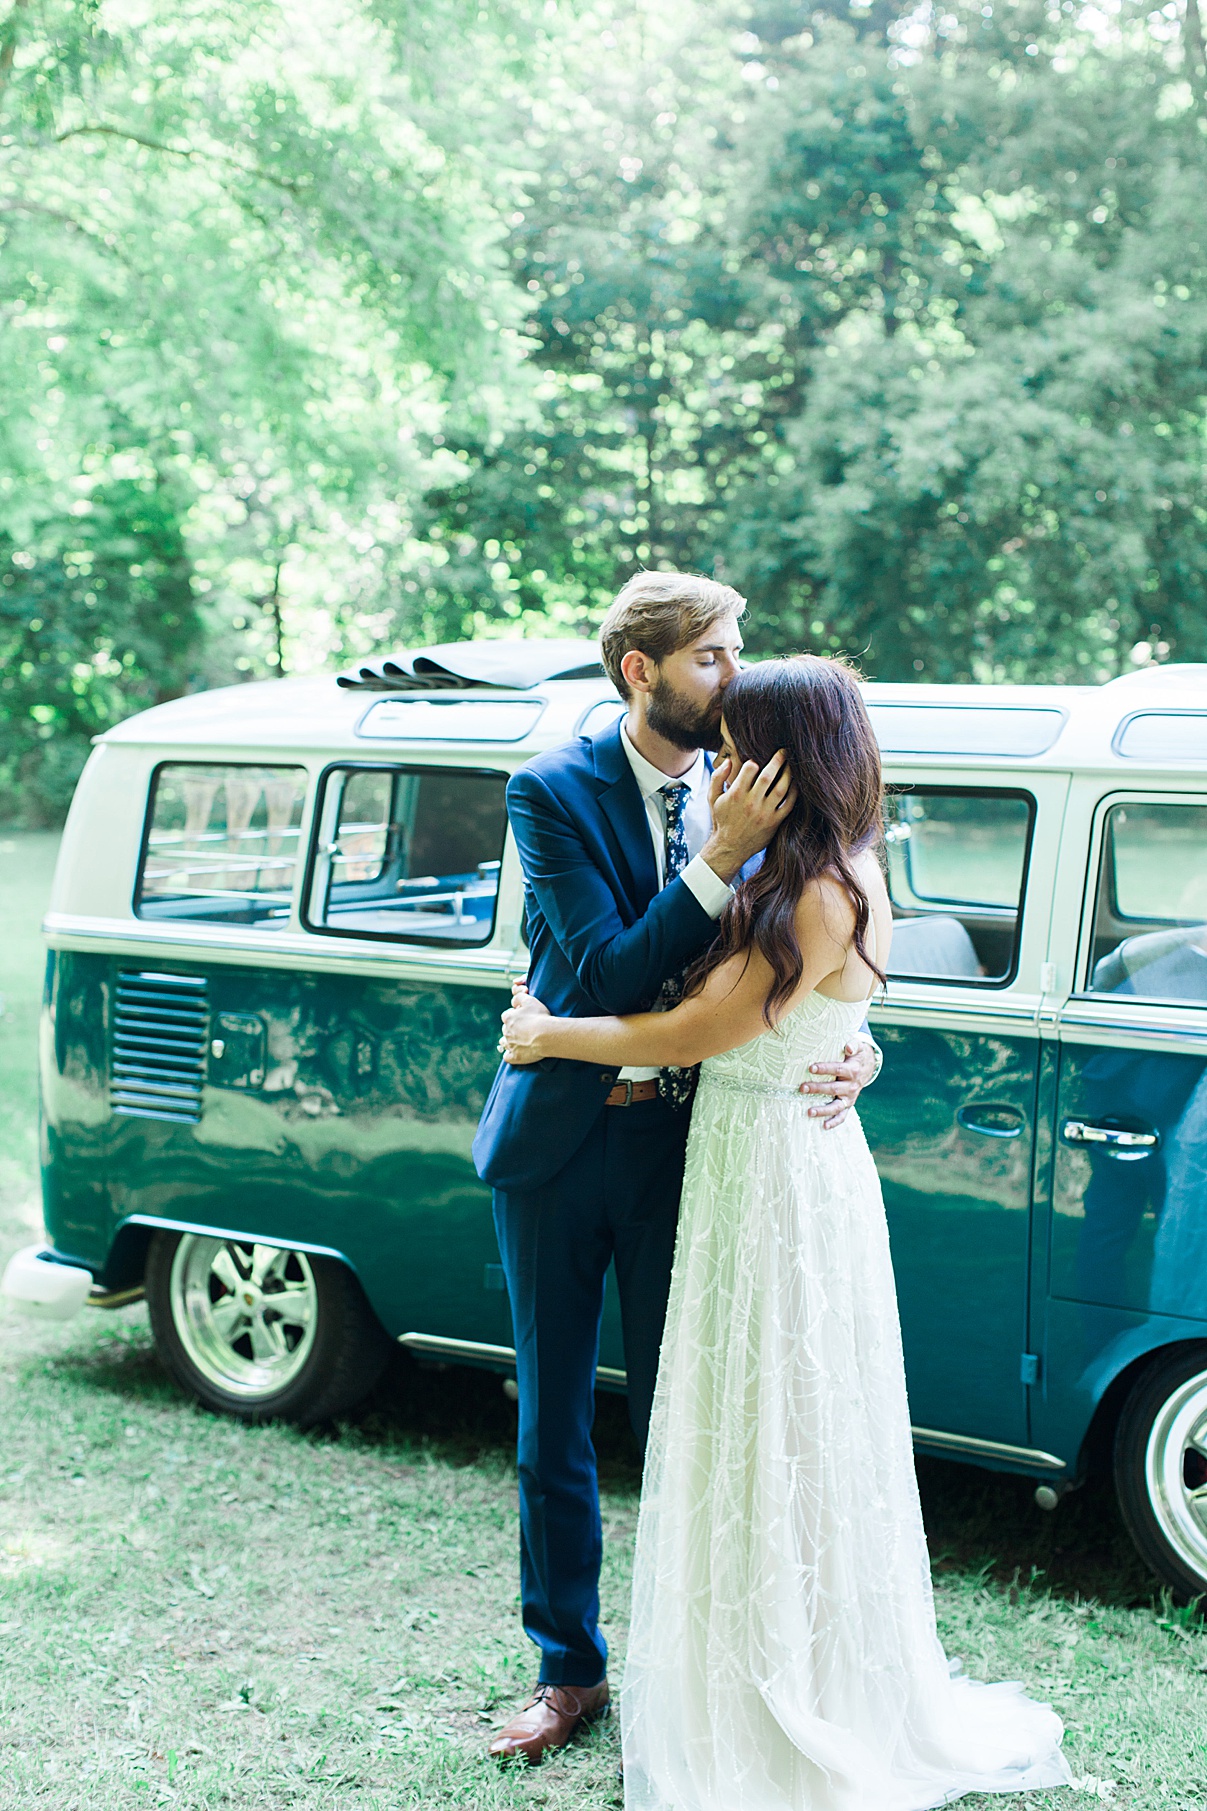 Groom kisses bride on forehead in front of vintage bus| Balls Falls, Ontario Wedding| Ontario Wedding Photographer| Toronto Wedding Photographer| 3Photography| 3photography.ca